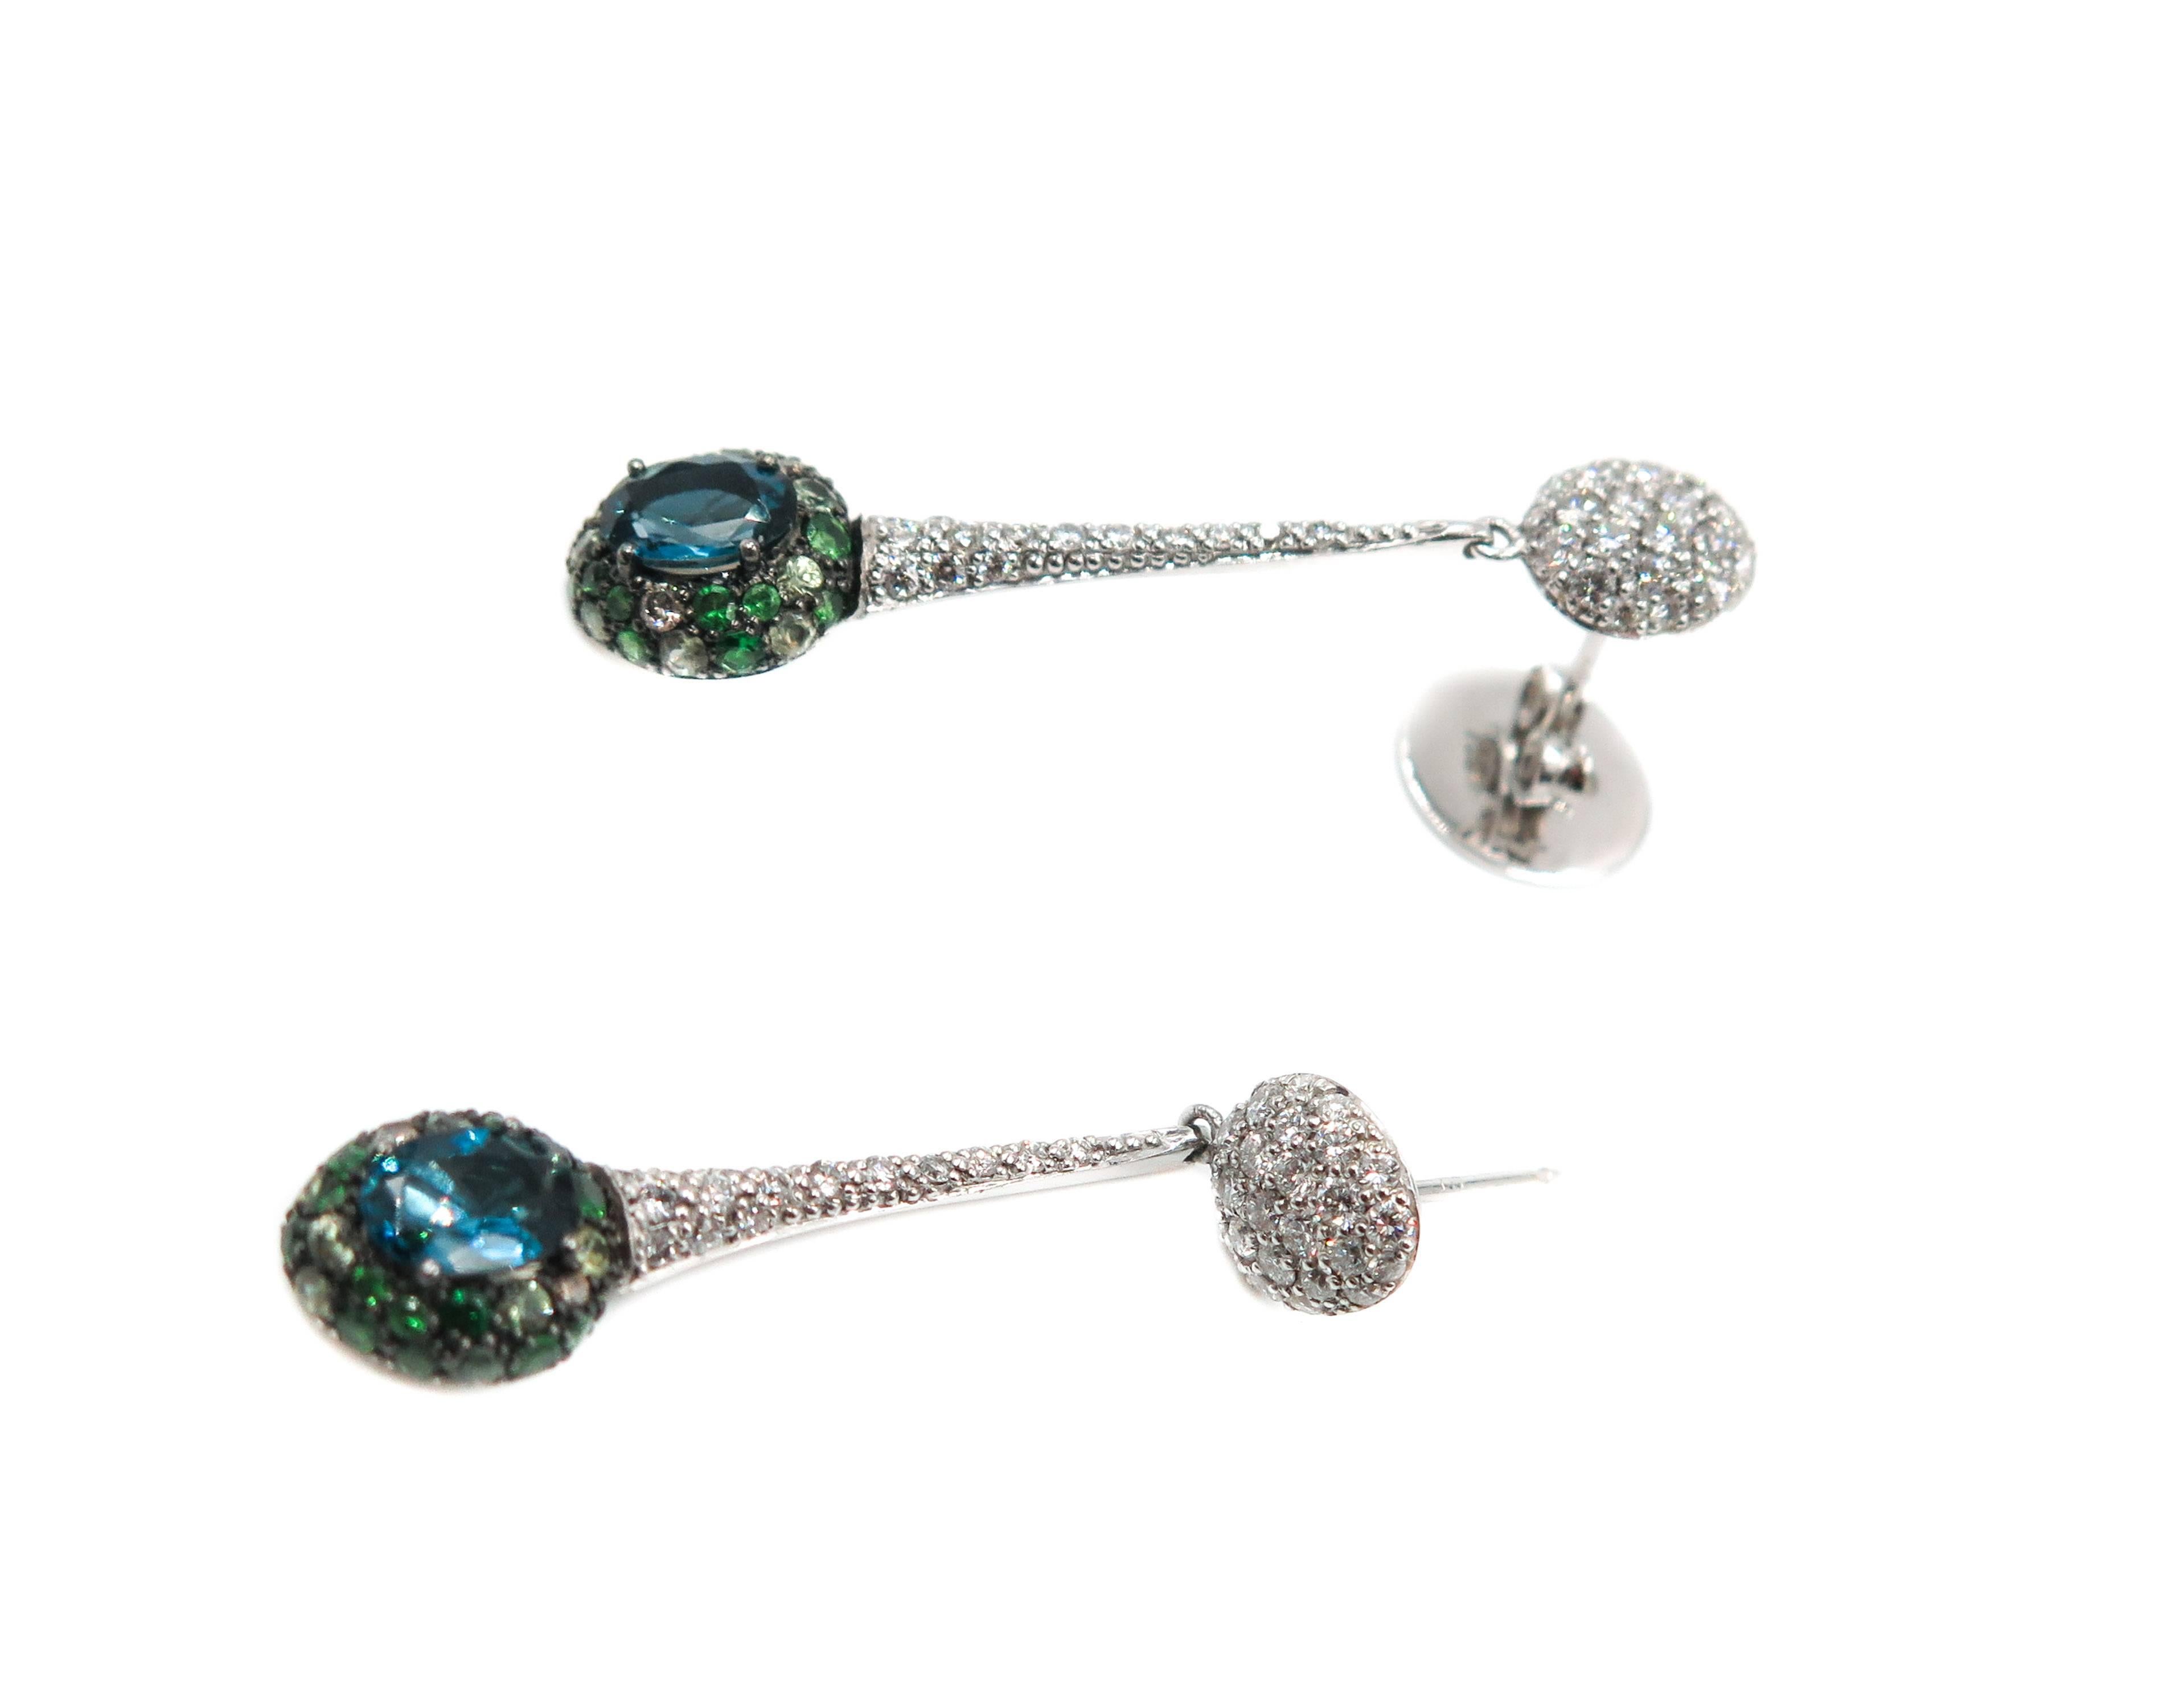 Sleek, elegant and stylish... are just few of the adjetive's that can be used to describe these earrings.
Handcrafted in Brazil by Brumani, in 18k white gold. This pair of long drop earrings, feature an oval blue tourmaline with accents of green